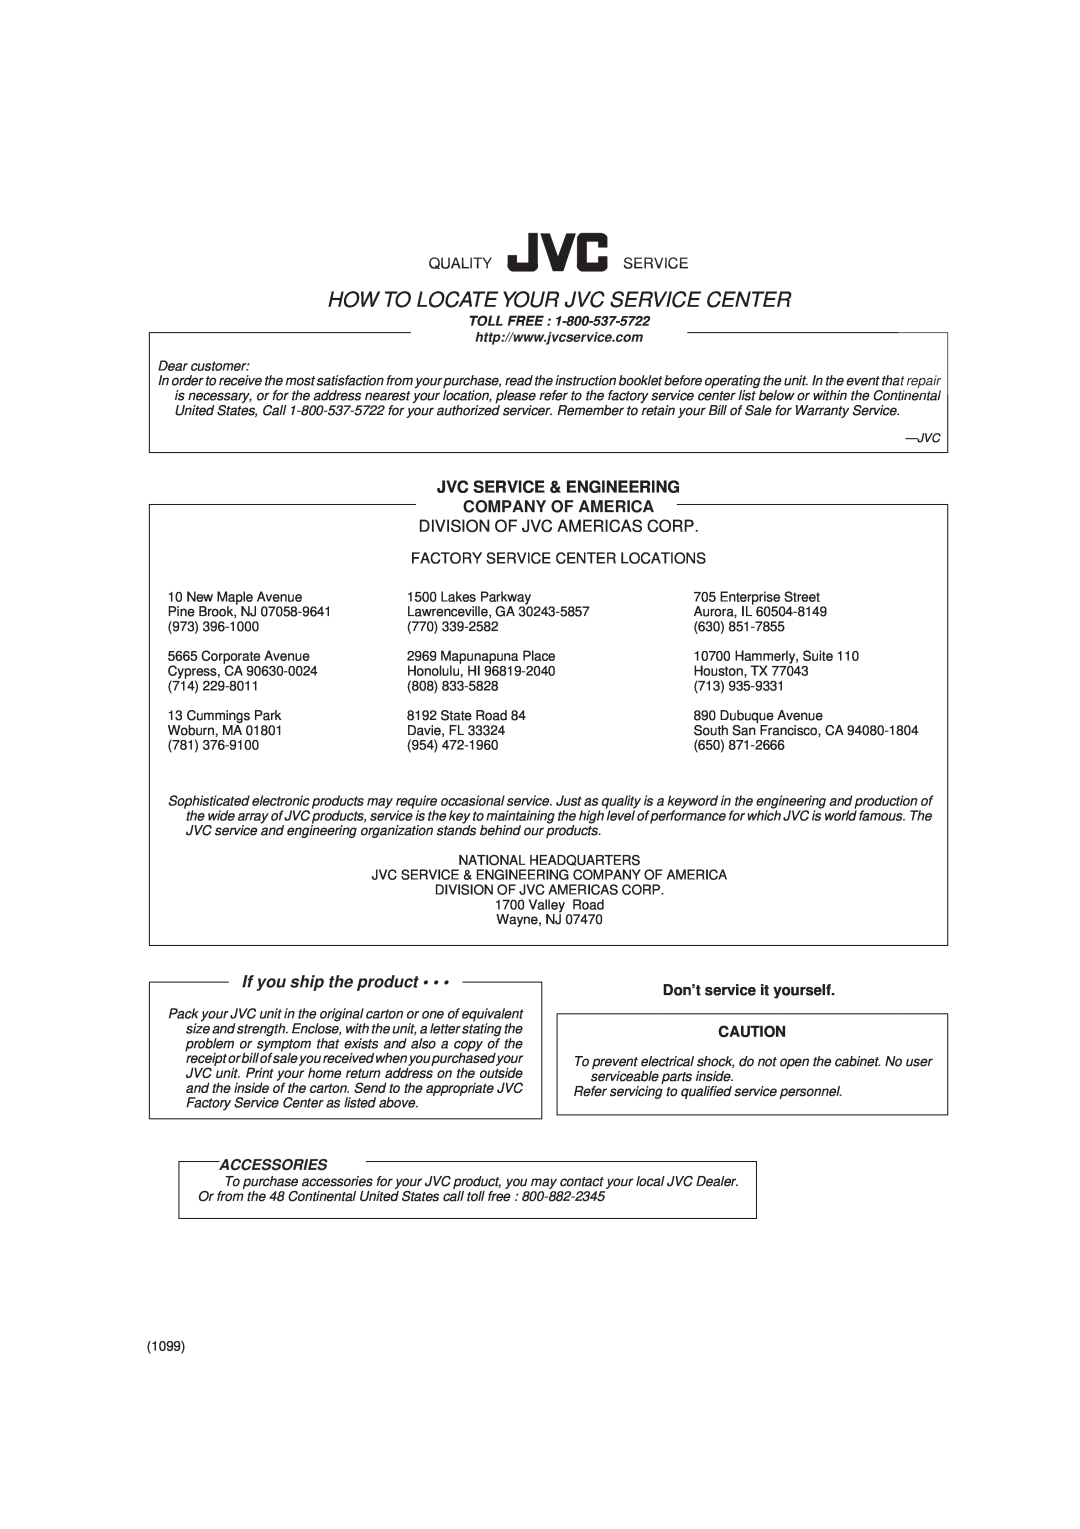 JVC MX-GT70 manual Jvc Service & Engineering Company Of America, If you ship the product, Qualityservice, Accessories 